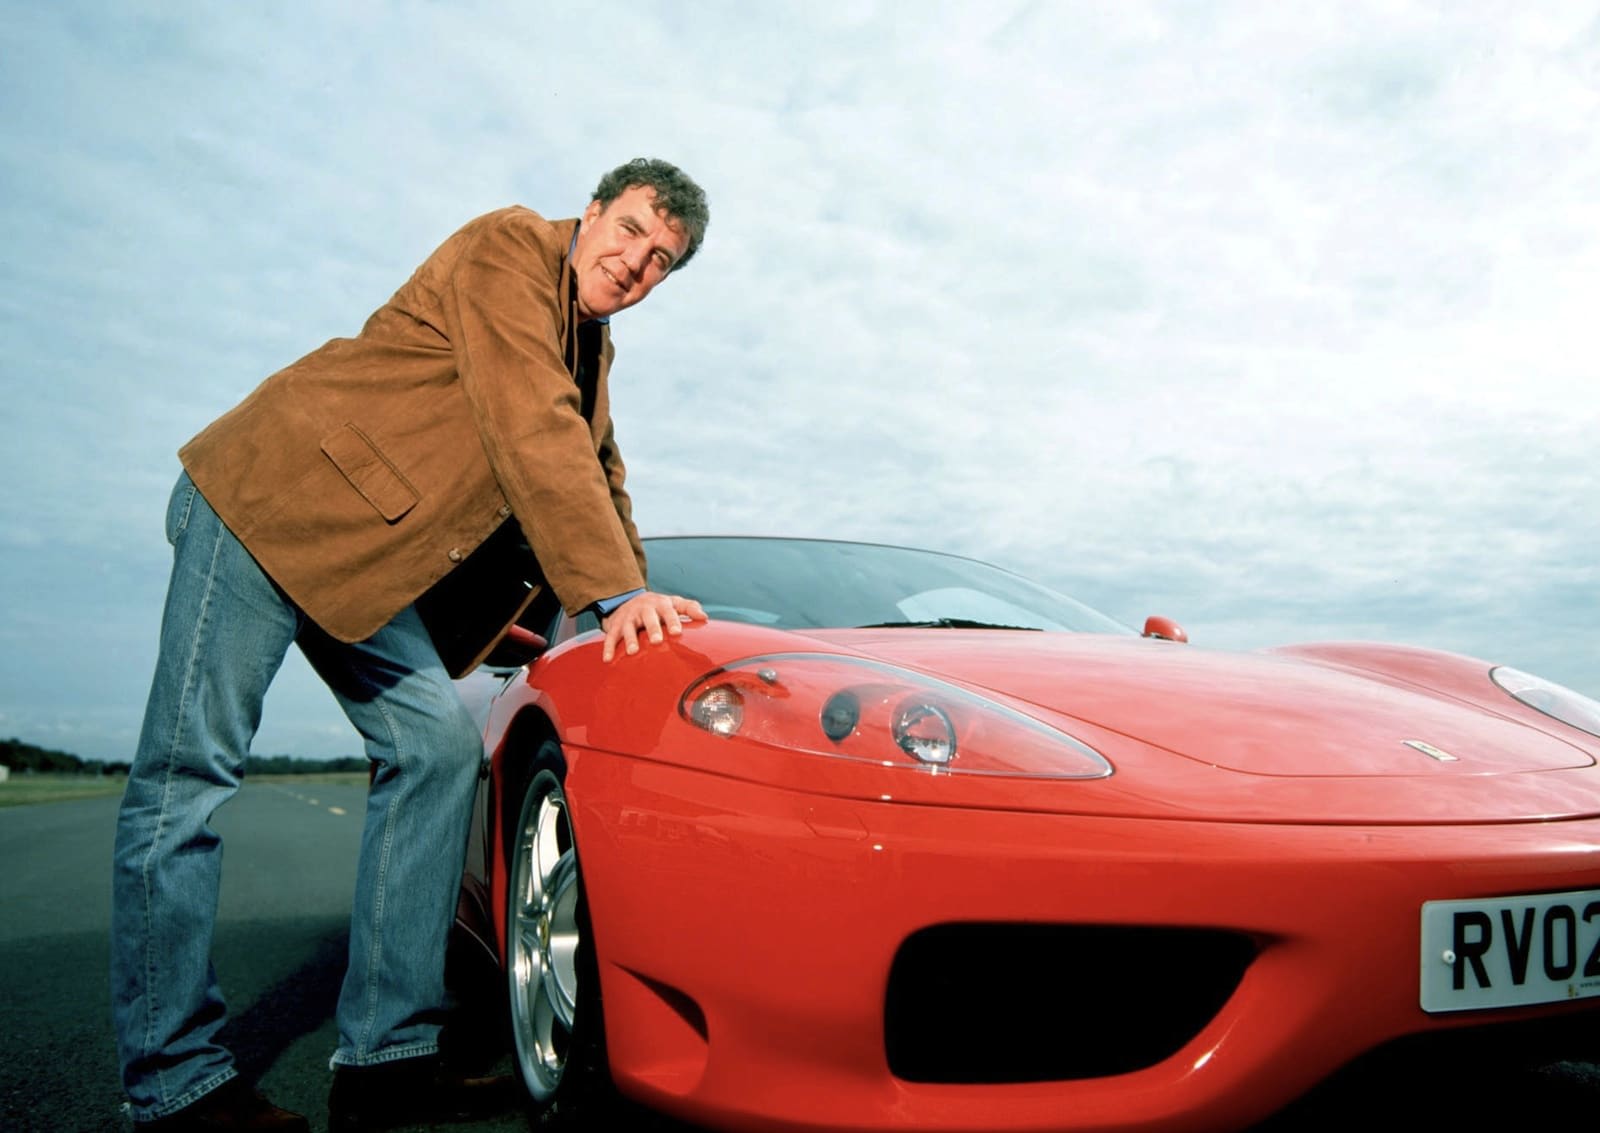 Women not attracted to men sports cars: study - Drive